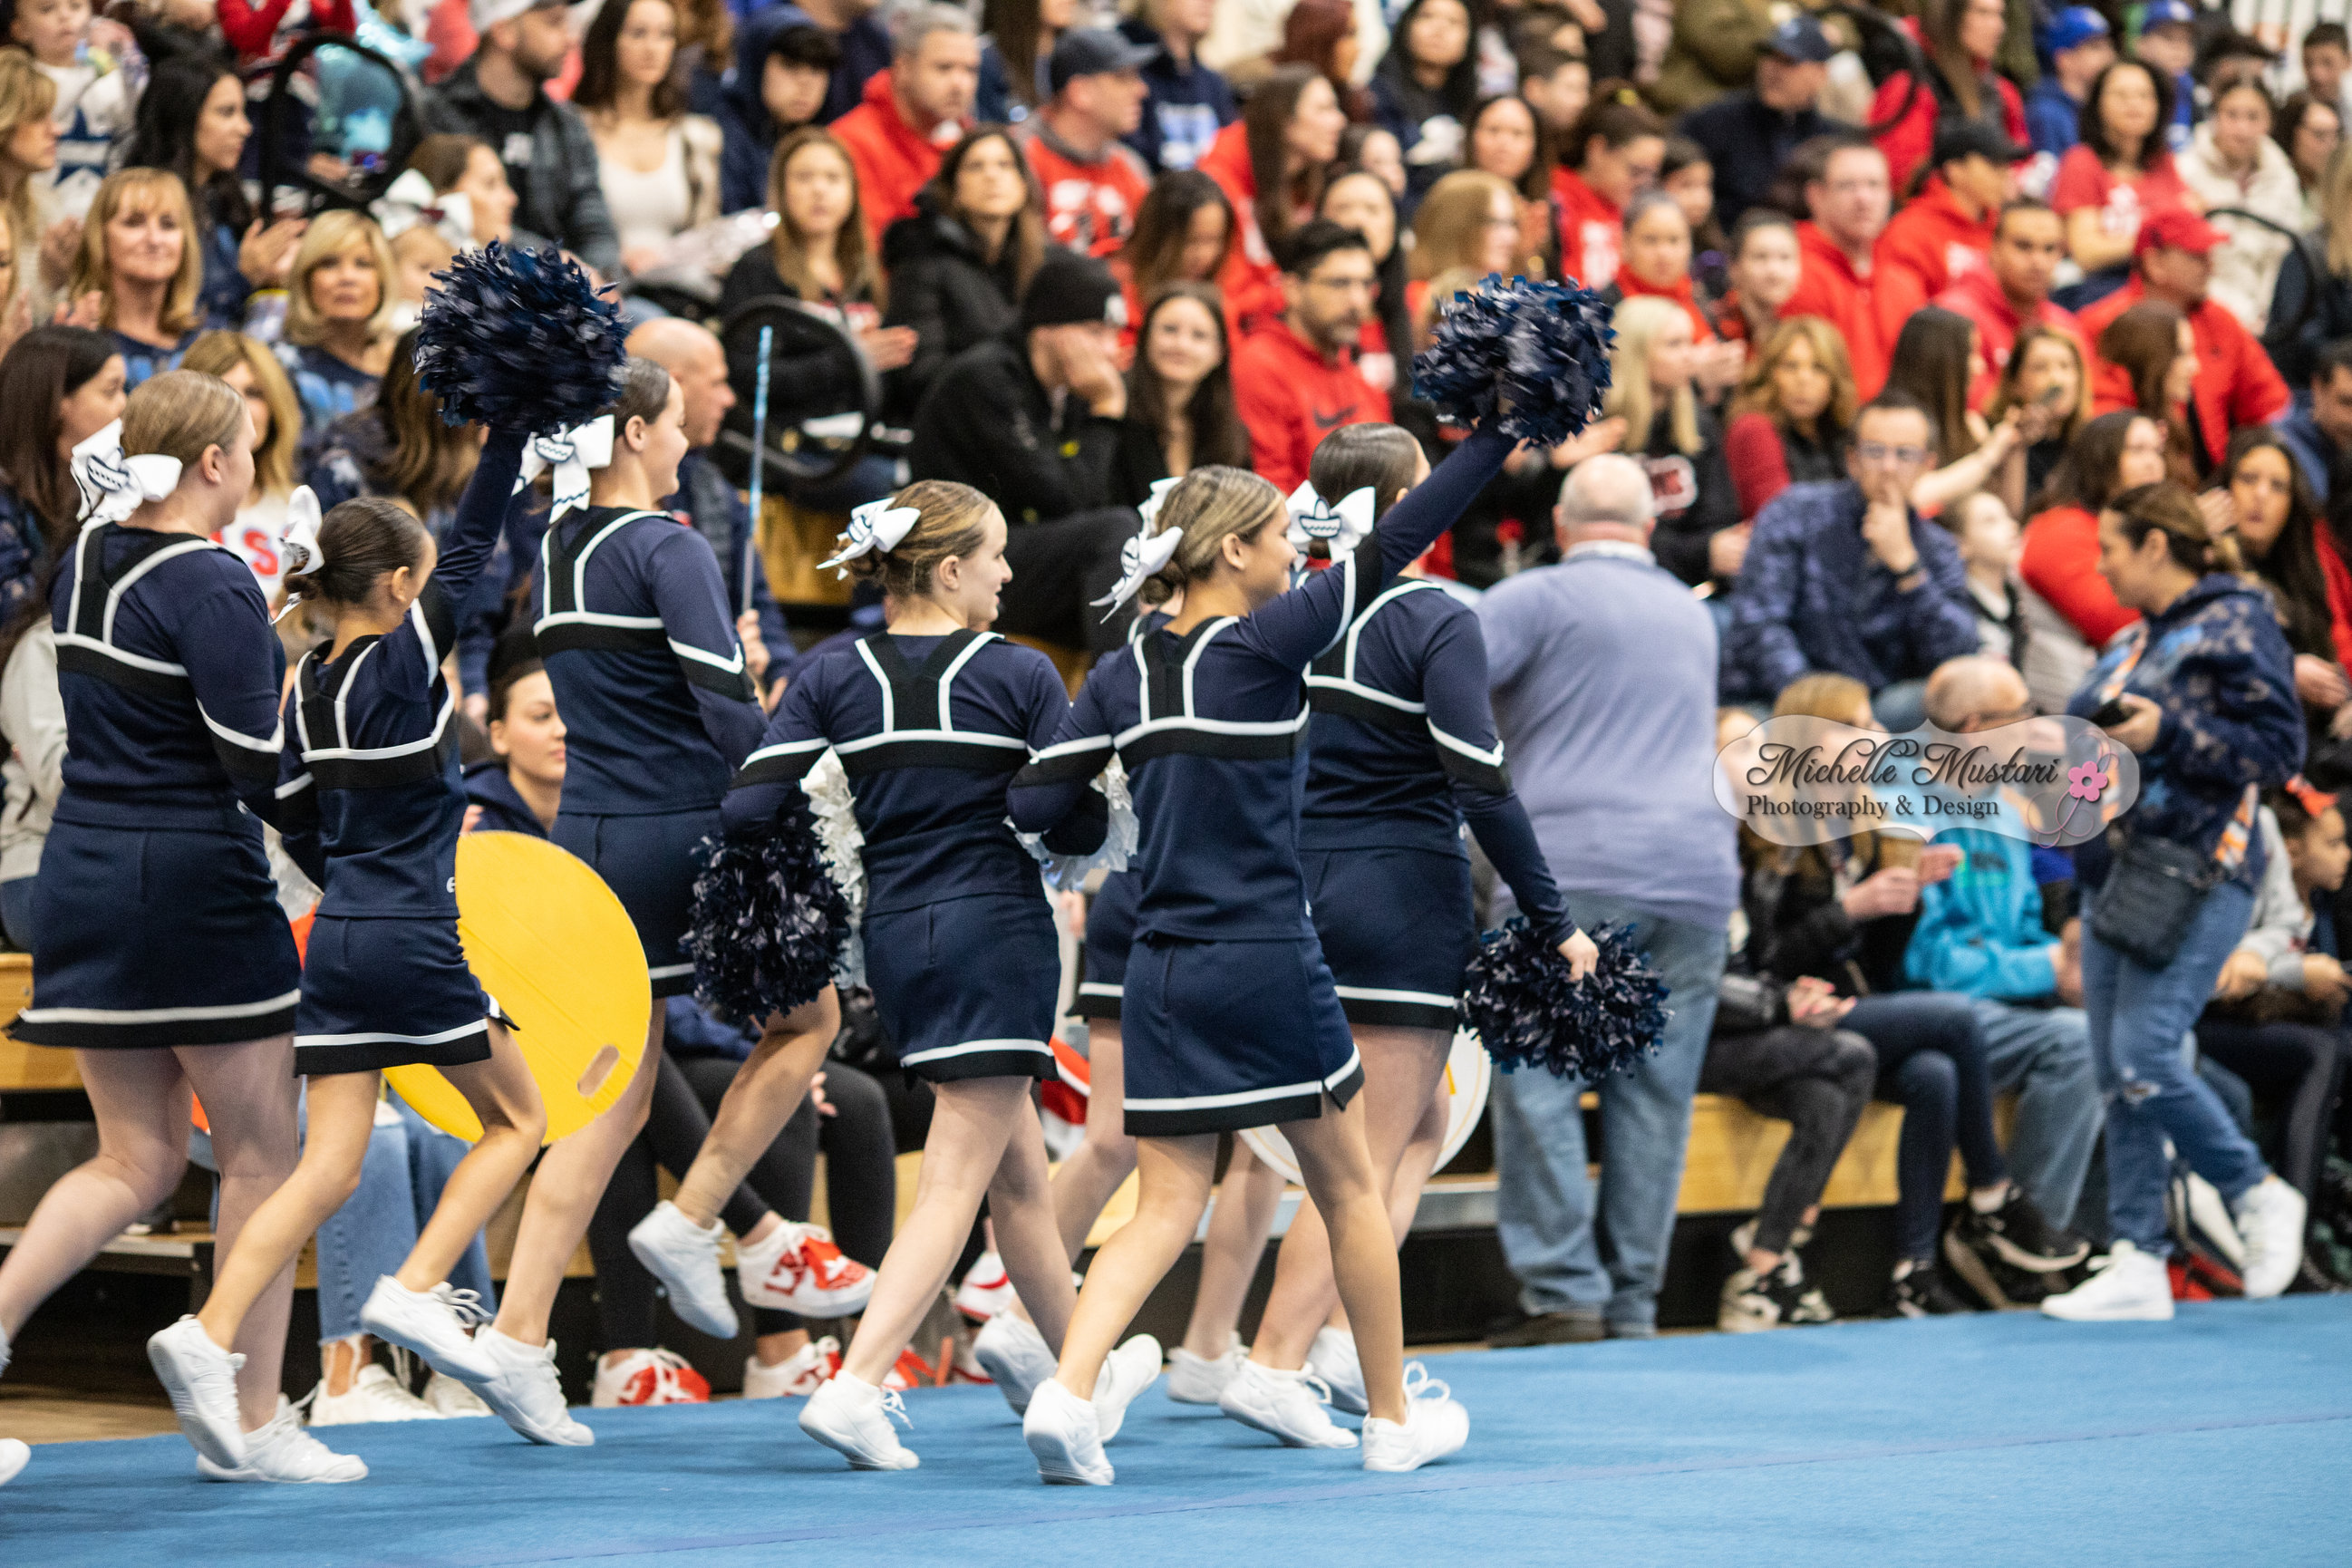 CYO State Cheerleading Competition Images Michelle Mustari